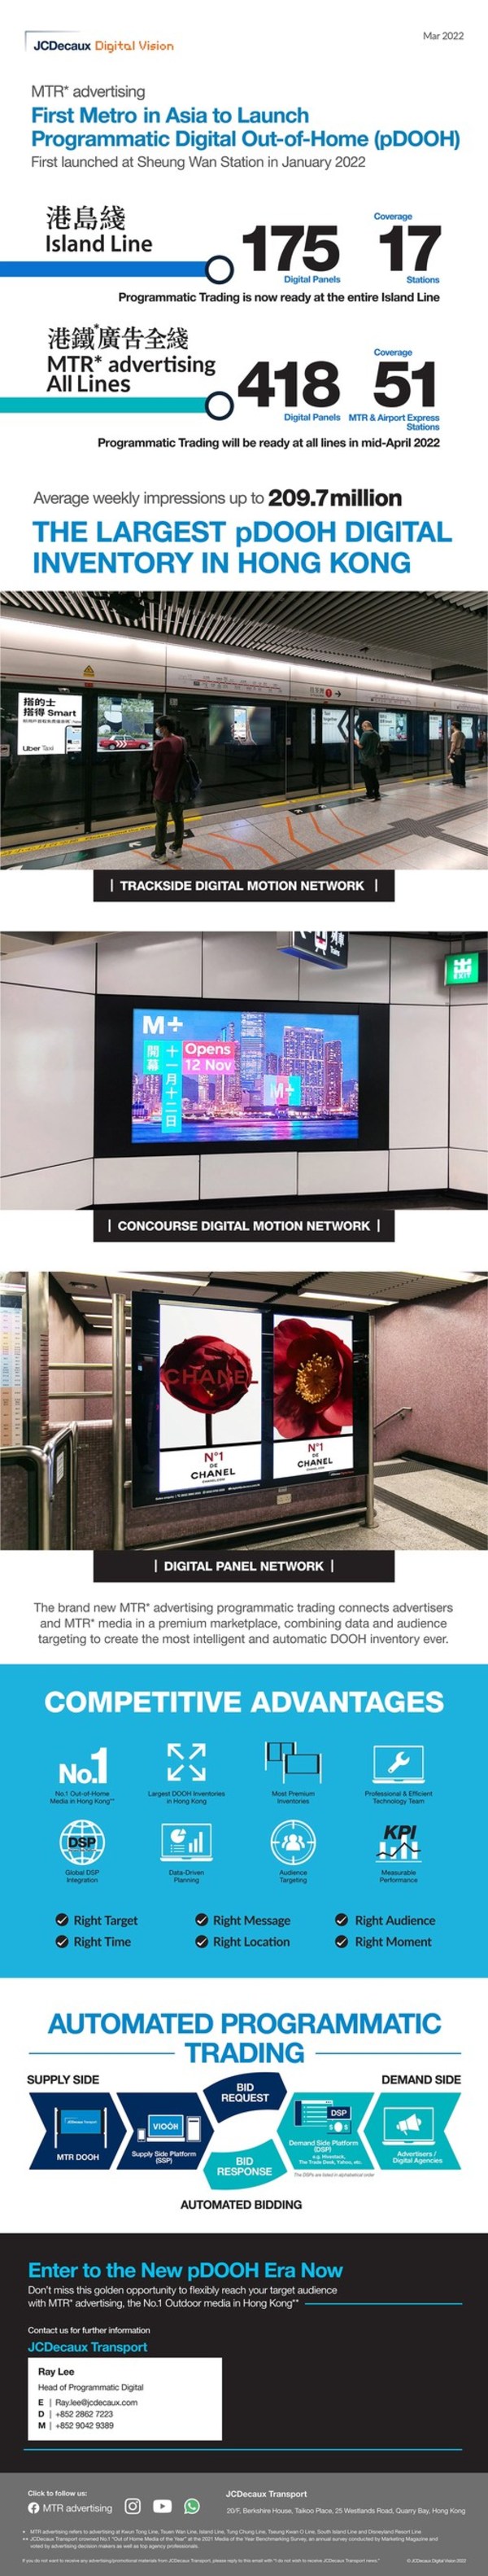 JCDecaux Transport: First Metro in Asia to launch Programmatic Digital Out-of-Home (pDOOH)